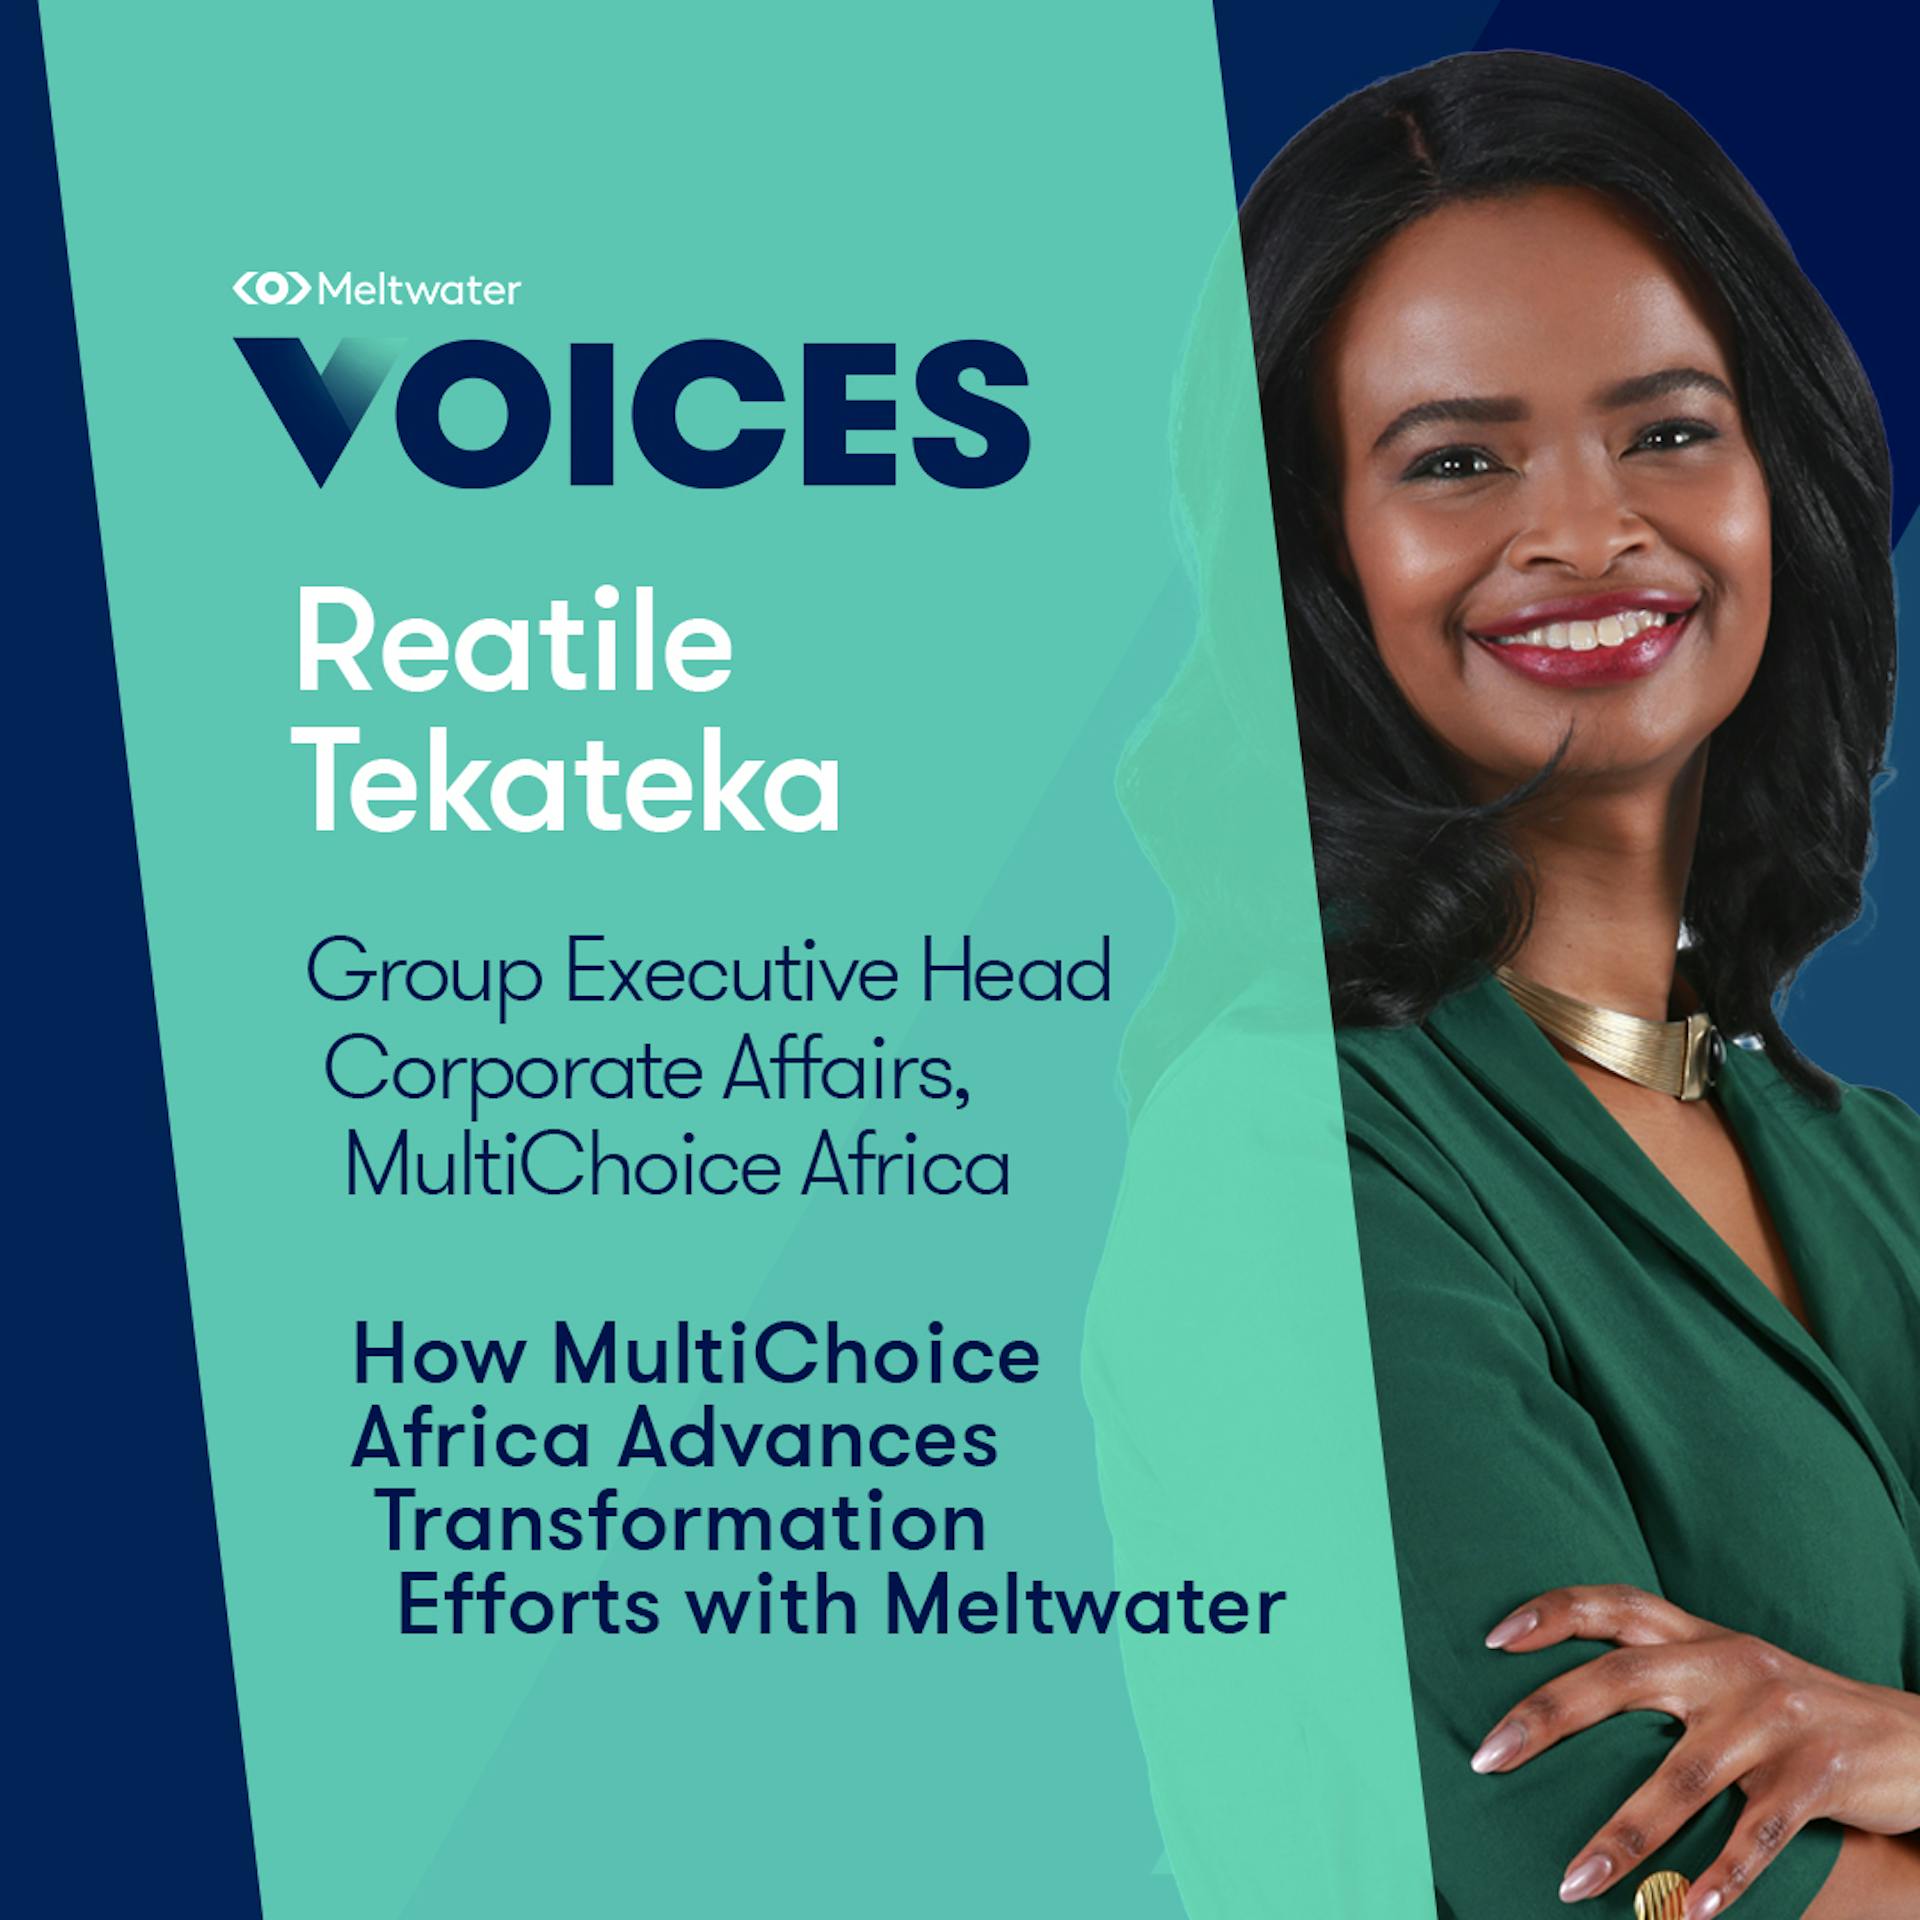 Meltwater Voices - Digital Transformation in Communications and Marketing - Reatile Tekateka